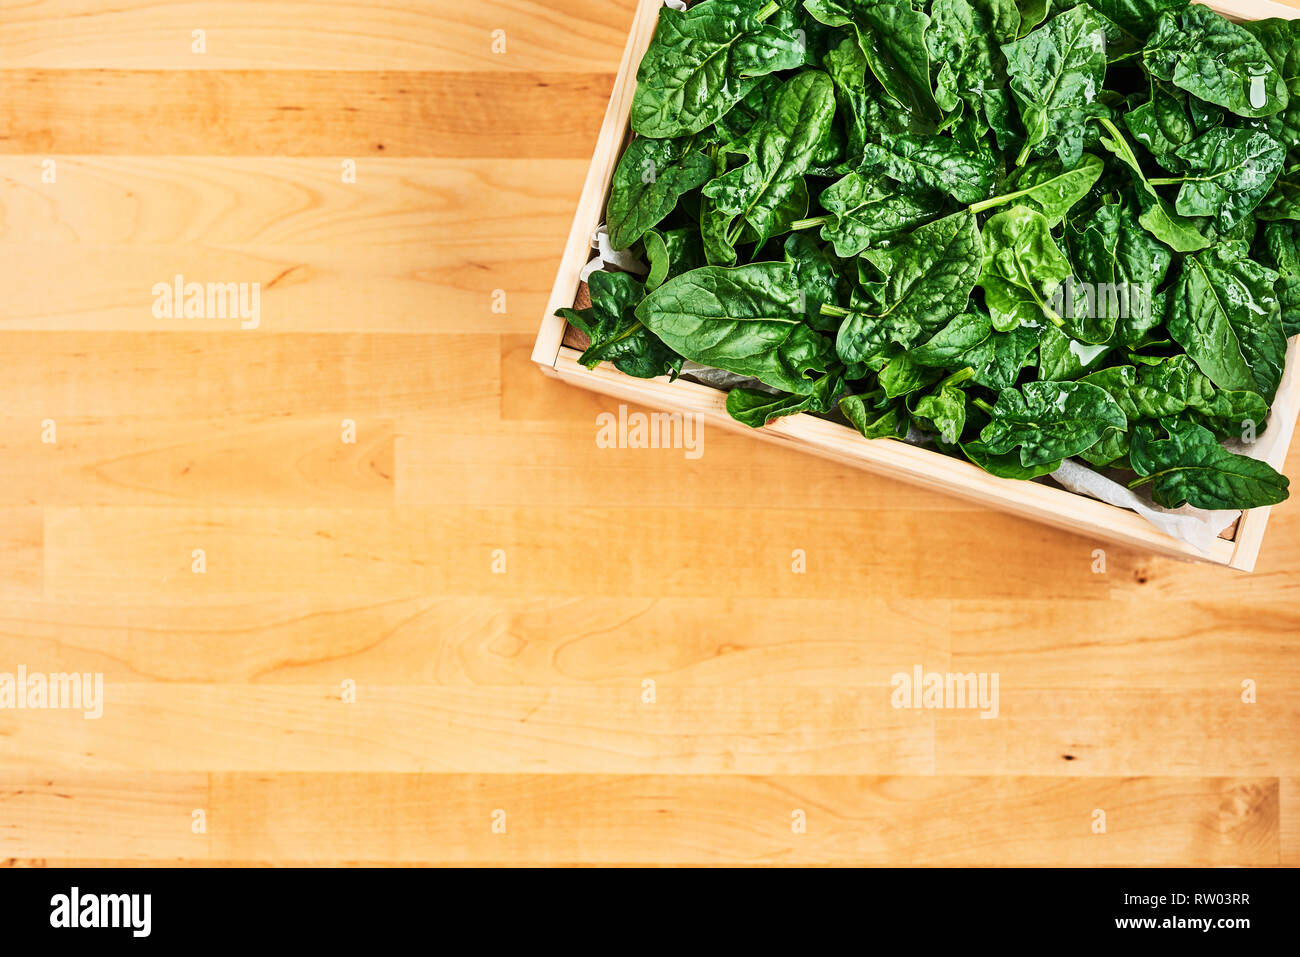 Fresh spinach leaves with water drops in wooden box on wooden table. Top view with copy space for text. Stock Photo